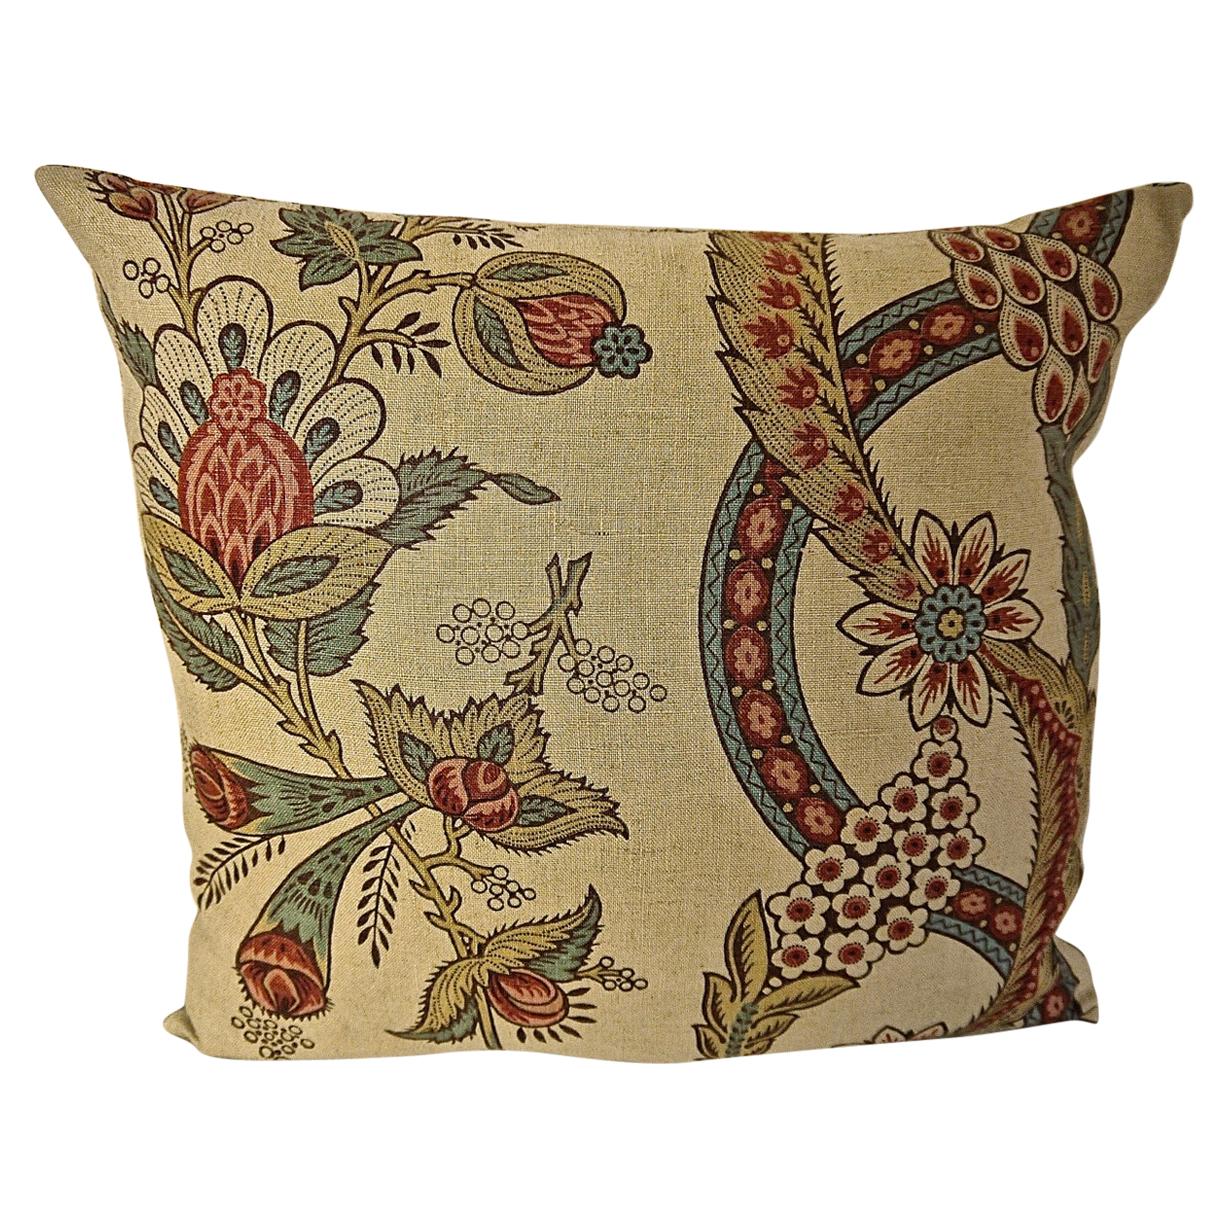 Stylised Floral Linen Pillow, French, 19th Century For Sale